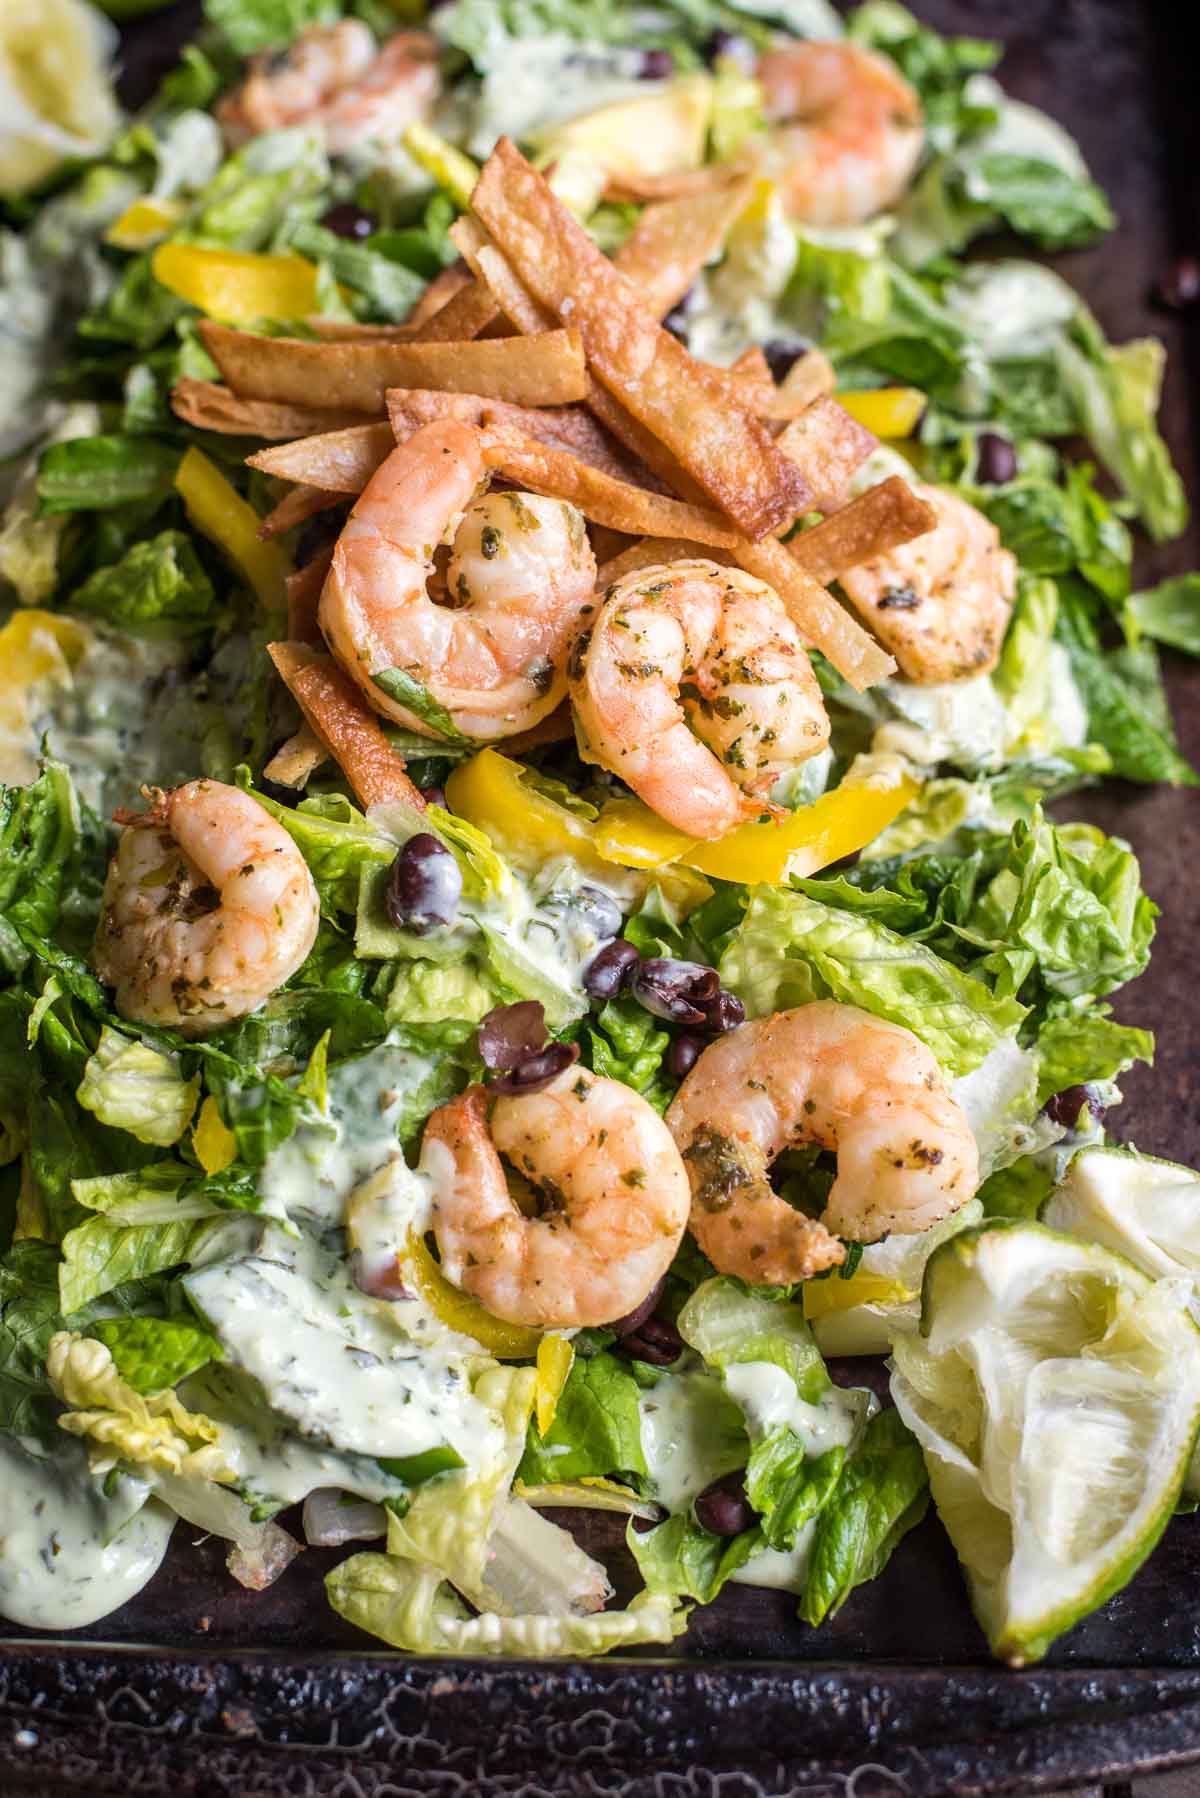 This Shrimp Taco Salad is the perfect crispy, crunchy, fresh weeknight meal!